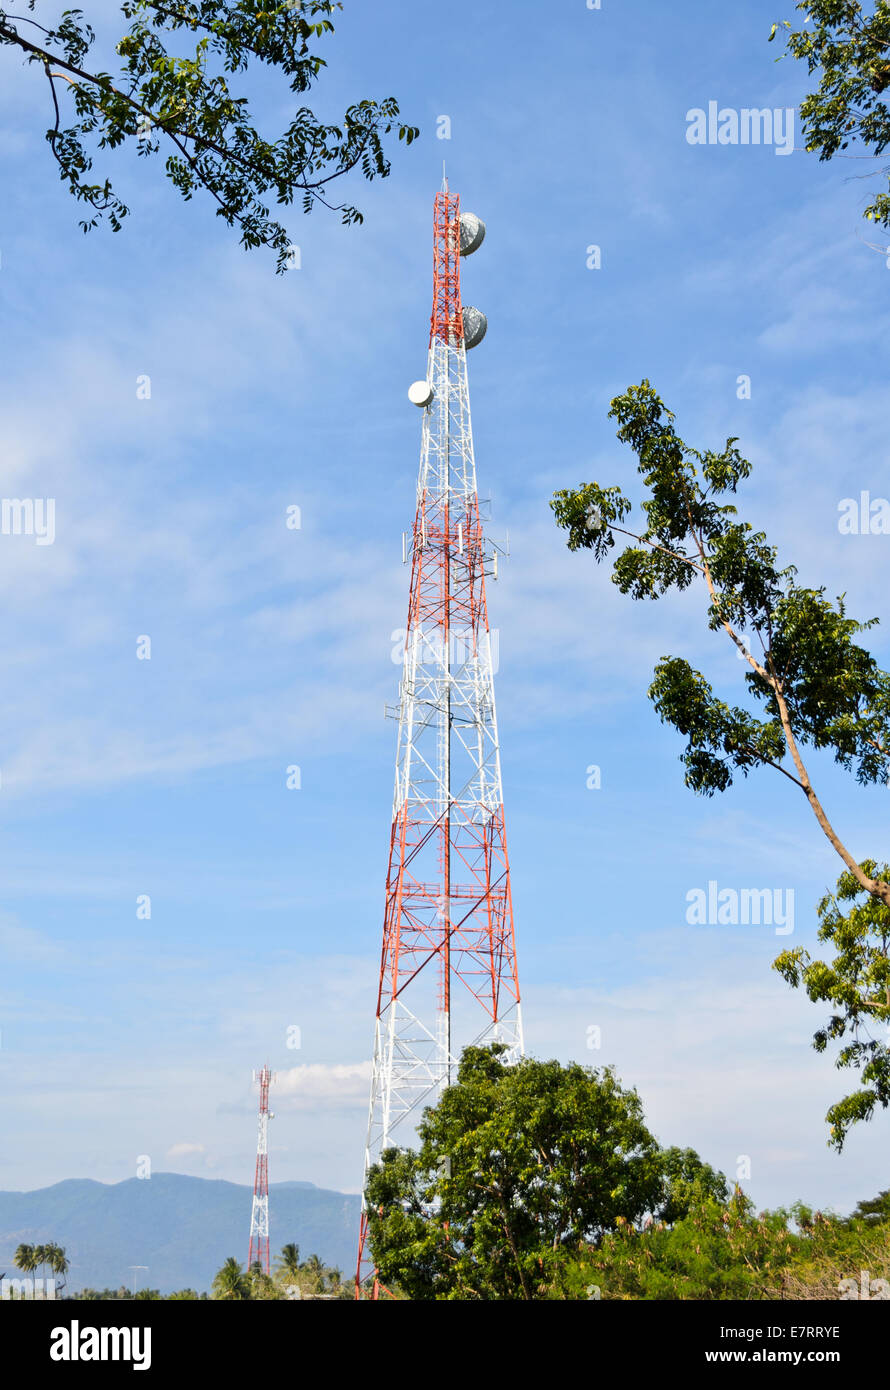 Tower relay signal and tree on blue sky background Stock Photo